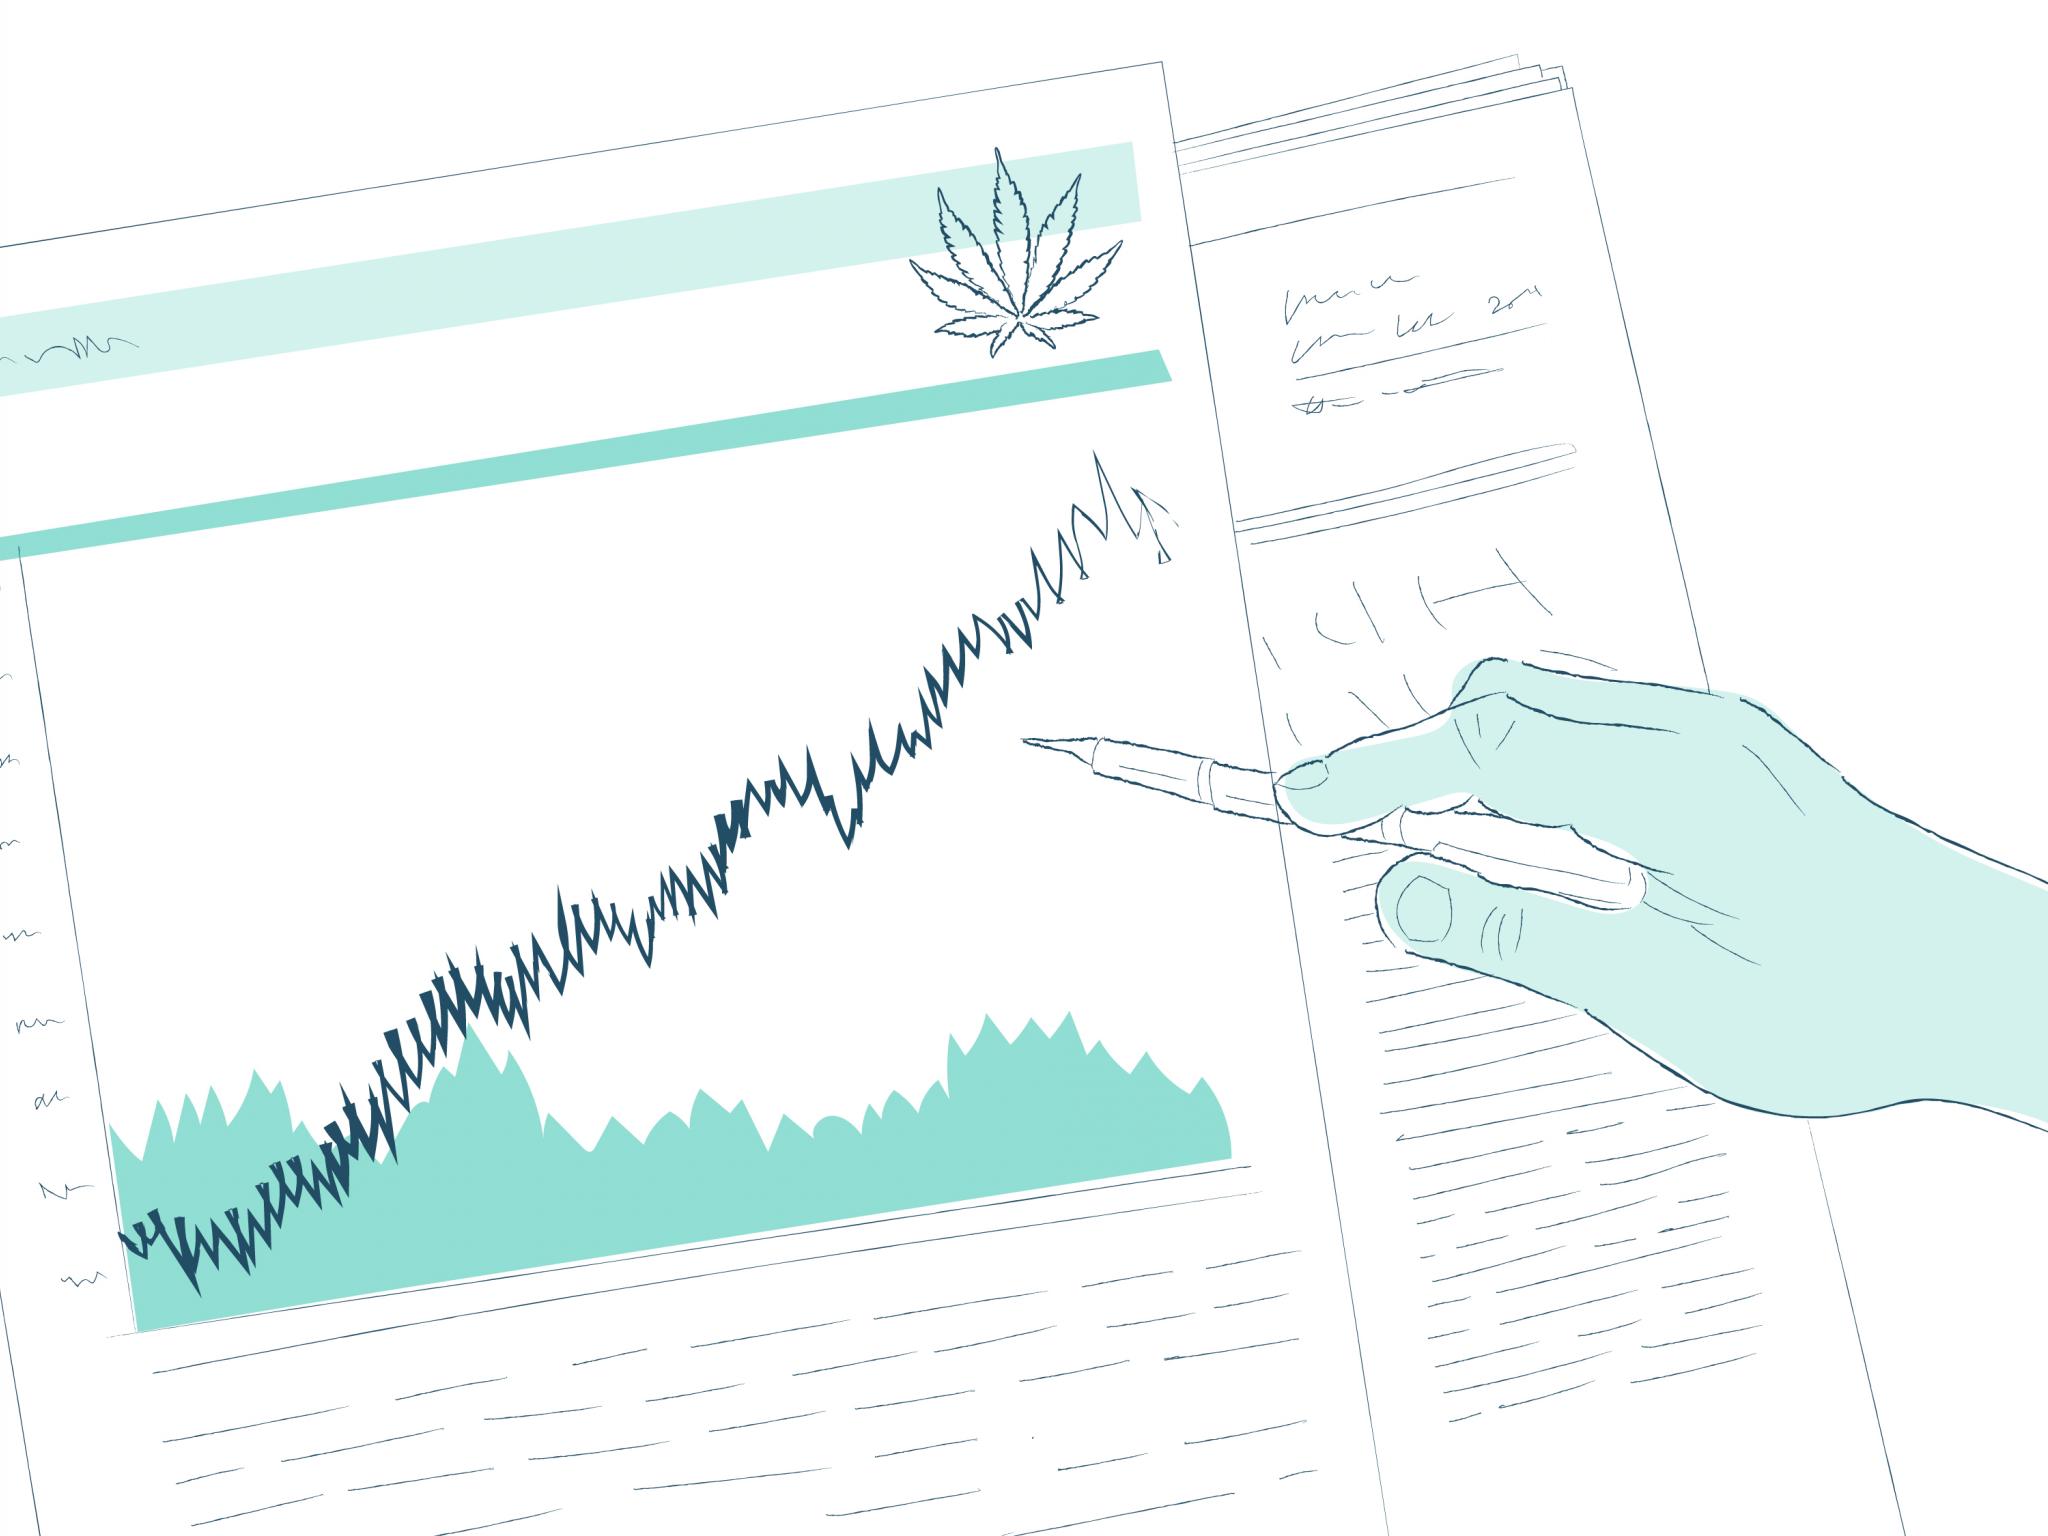  cannabis-stock-gainers-and-losers-from-june-2-2021 